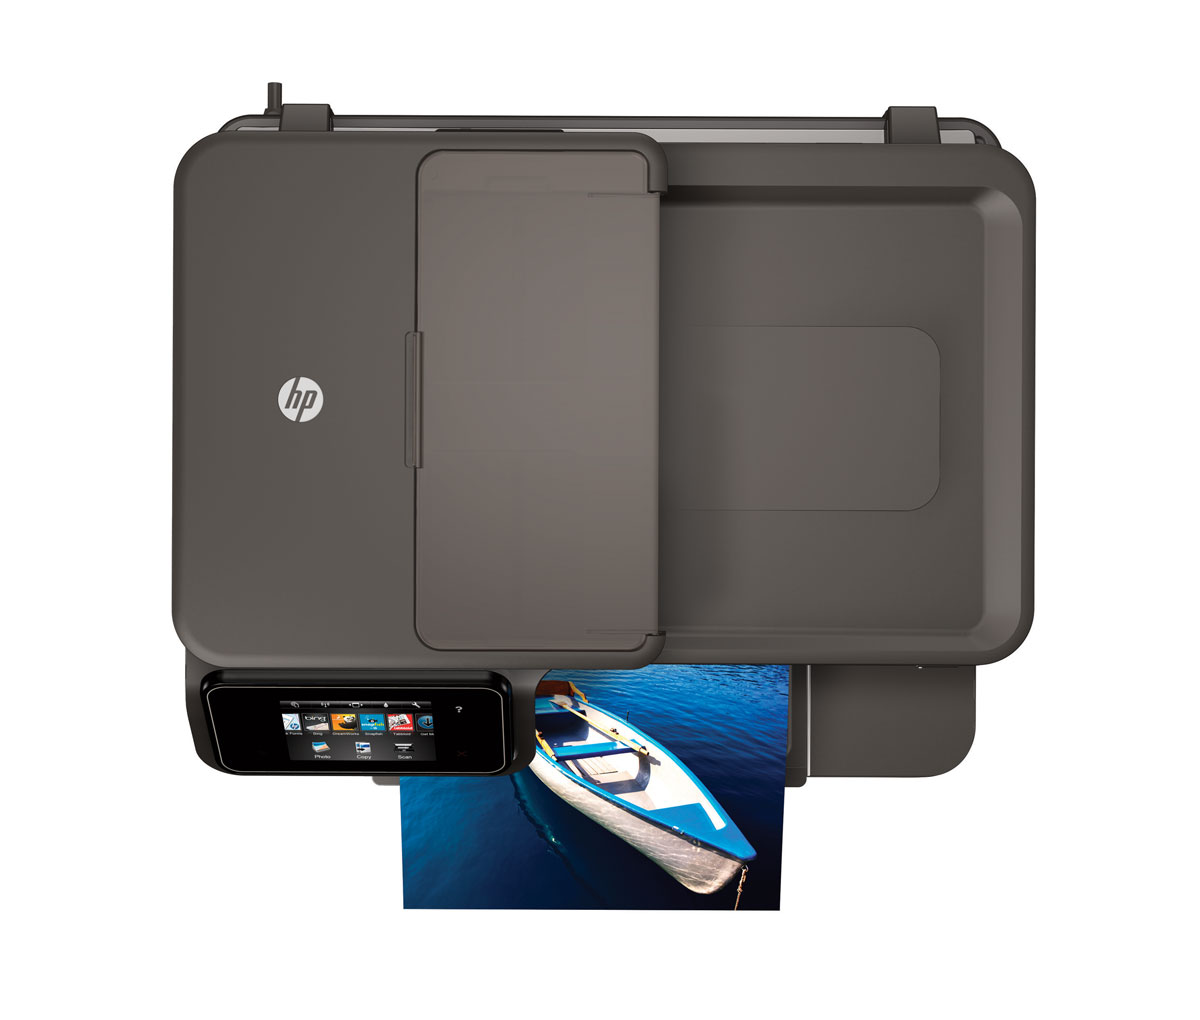 HP Photosmart 7510 e-All-in-One Top View